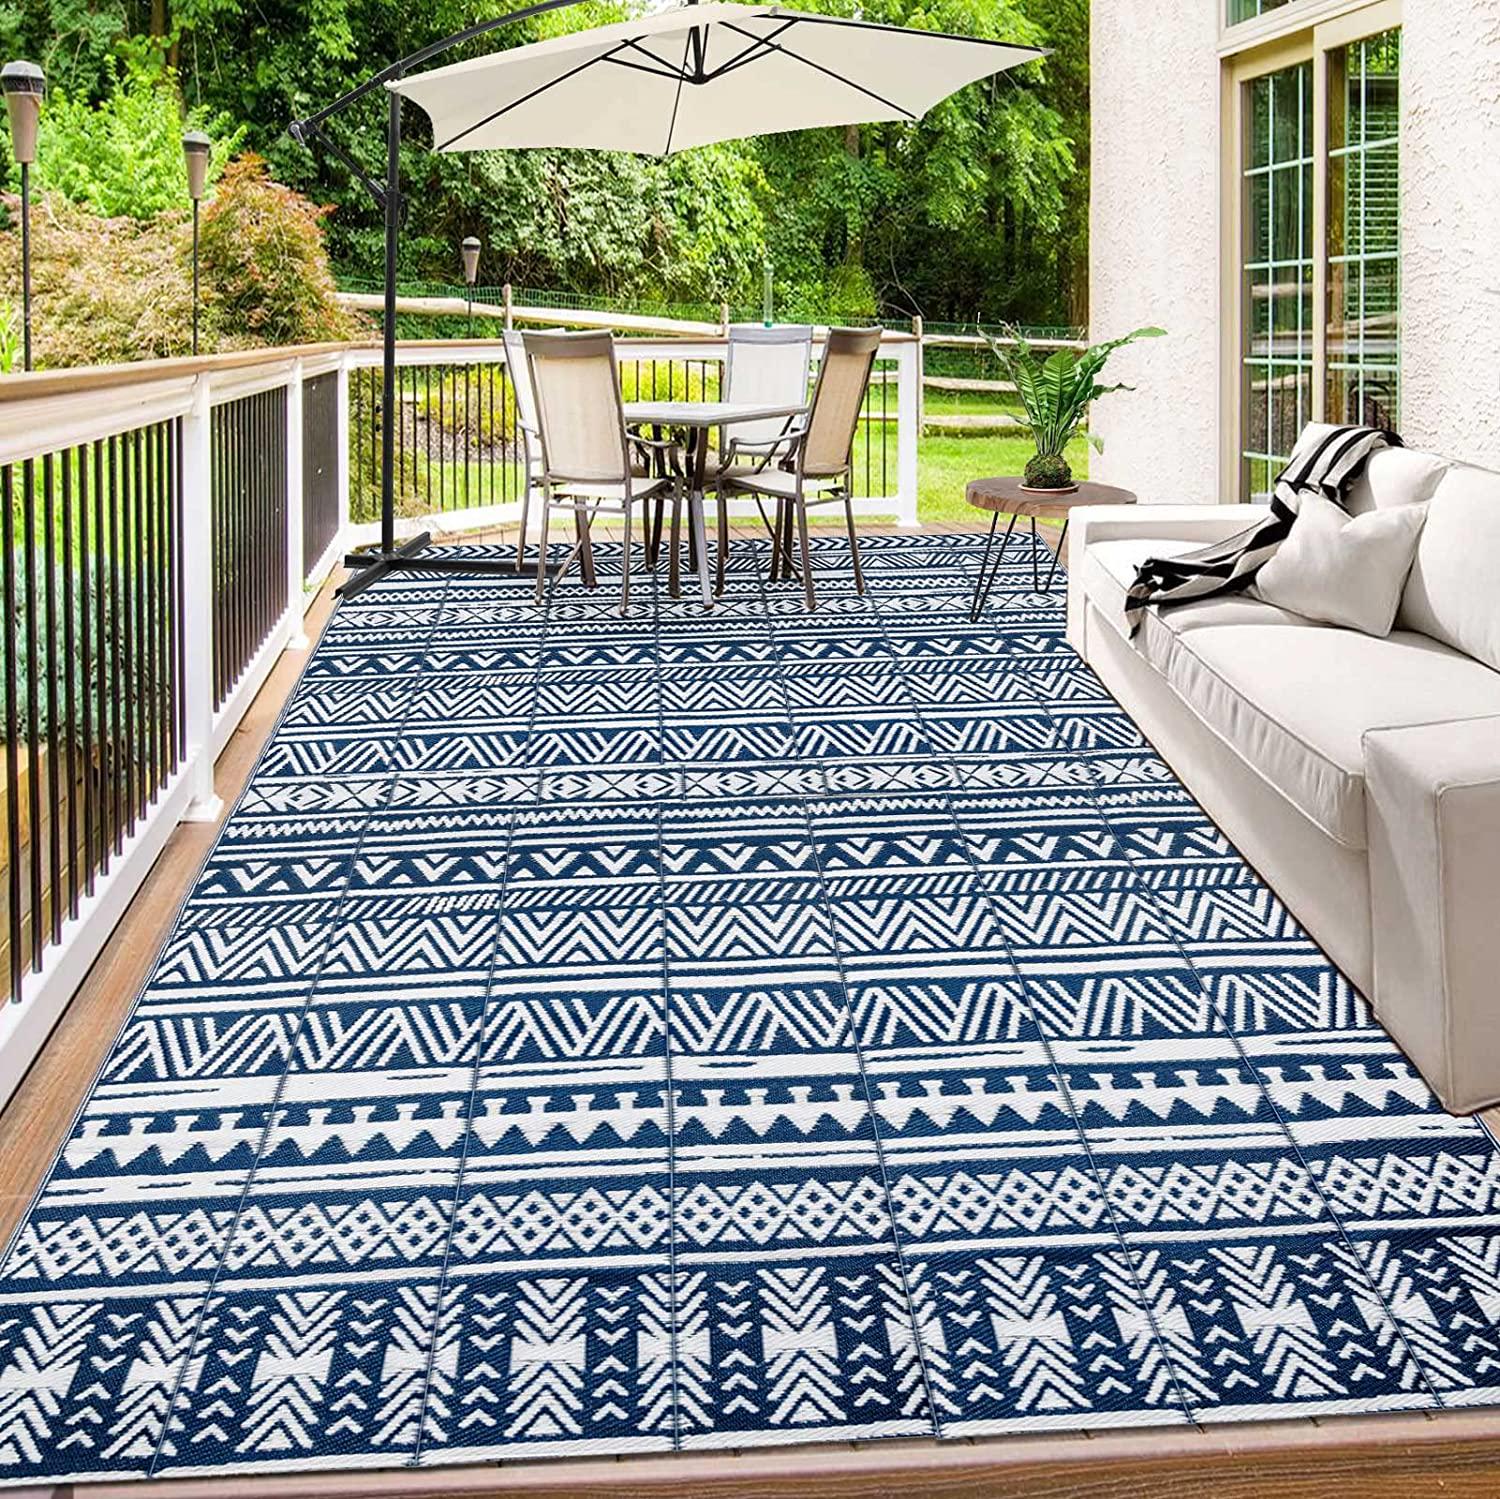 HiiARug 9&#039;x12&#039; Reversible Outdoor Rug, Plastic Straw Patio Rugs RV Camping Rug Reversible Mats, Large Floor Mat and Rug for RV, Patio, Backyard, Deck, Picnic, Beach, Trailer, Camping(Navy/White)-